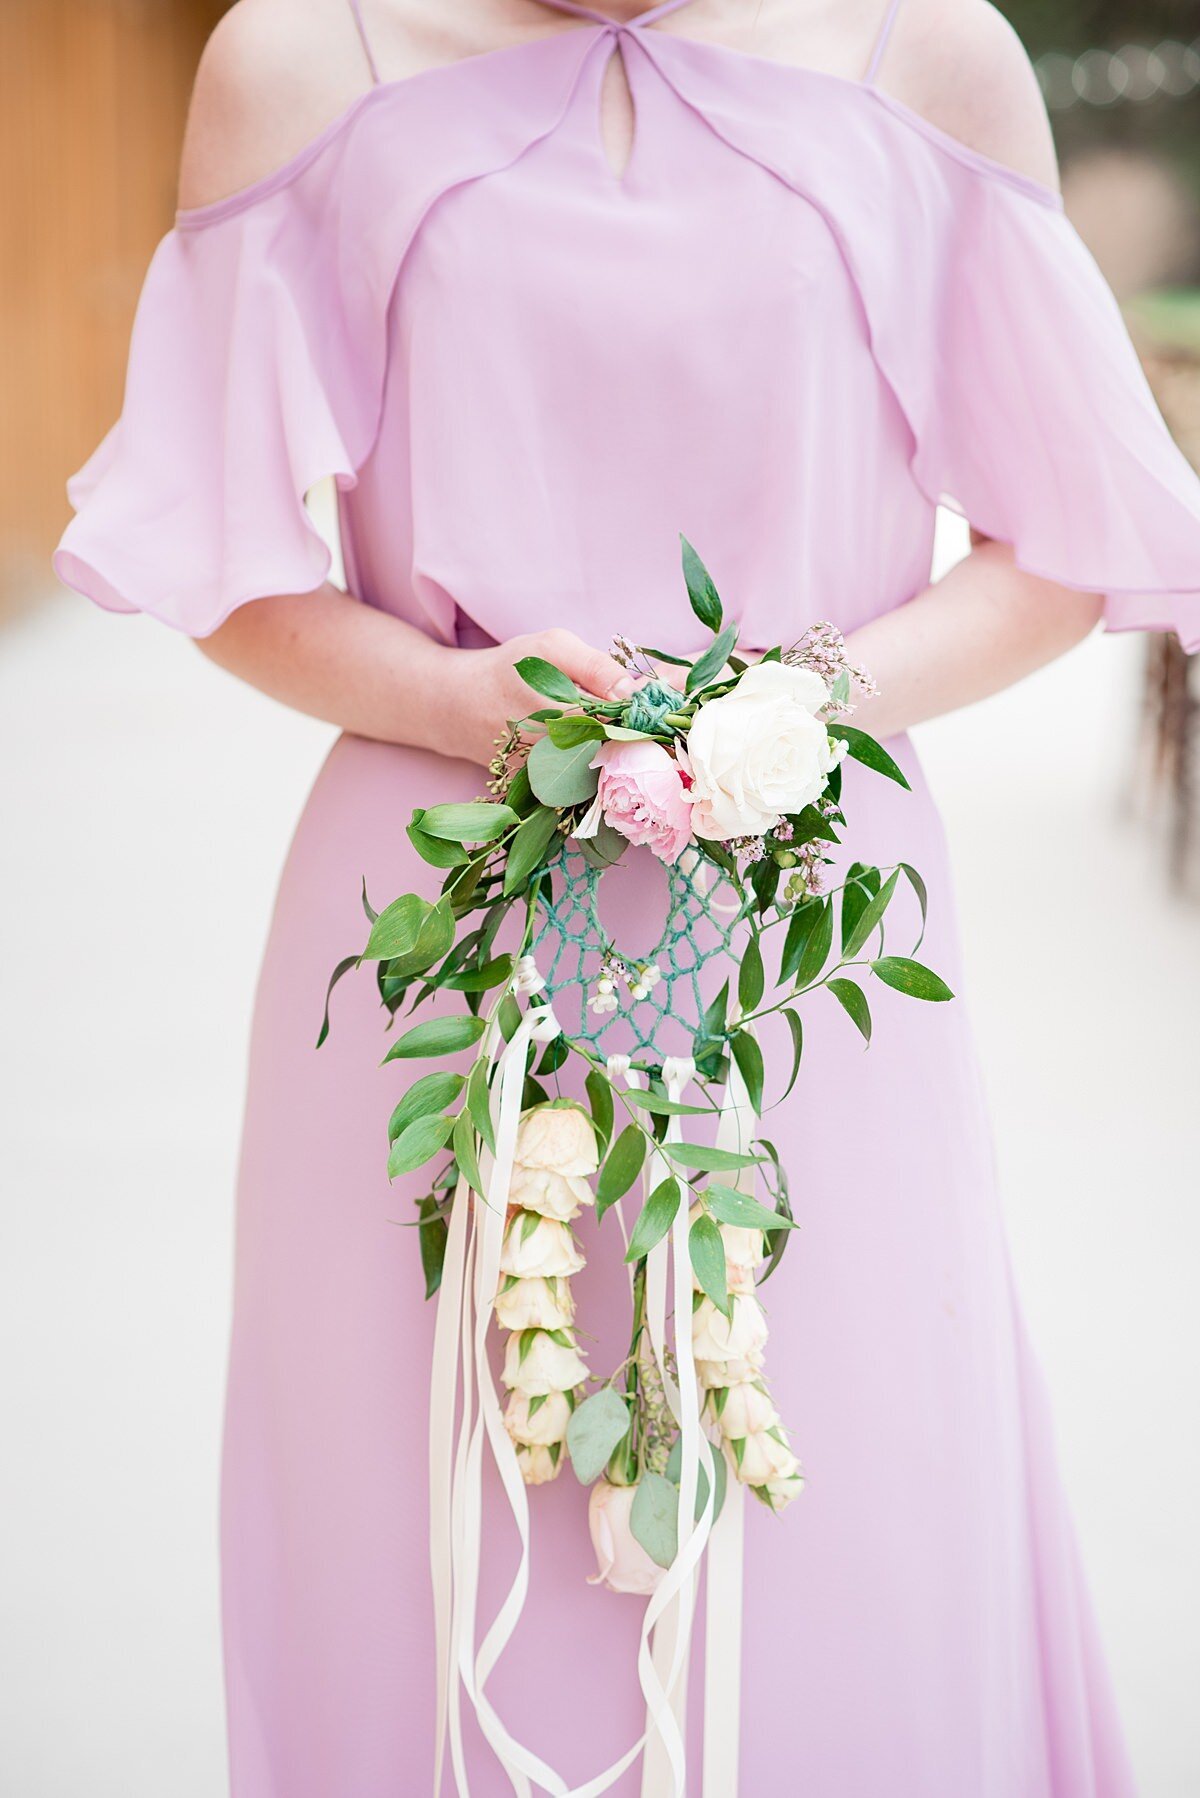 The bride is wearing a very light purple dress with a cold shoulder top accented by a large ruffle. Her bouquet is a large halo dreamcatcher accented by greenery, a white and pink flower and long streaming ivory ribbons.